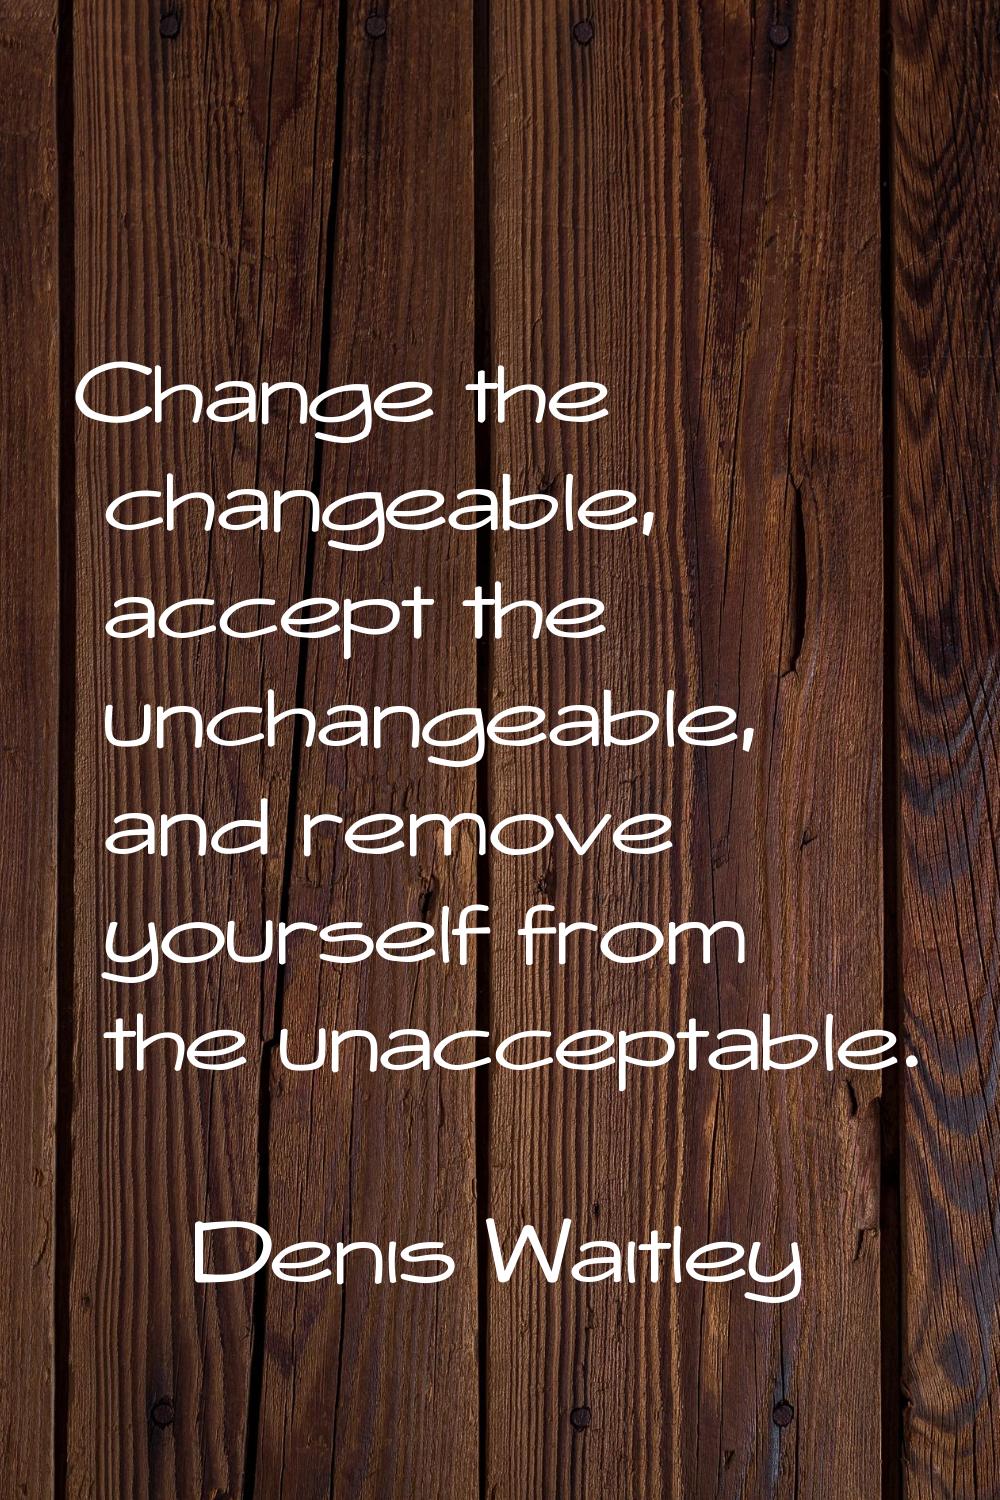 Change the changeable, accept the unchangeable, and remove yourself from the unacceptable.